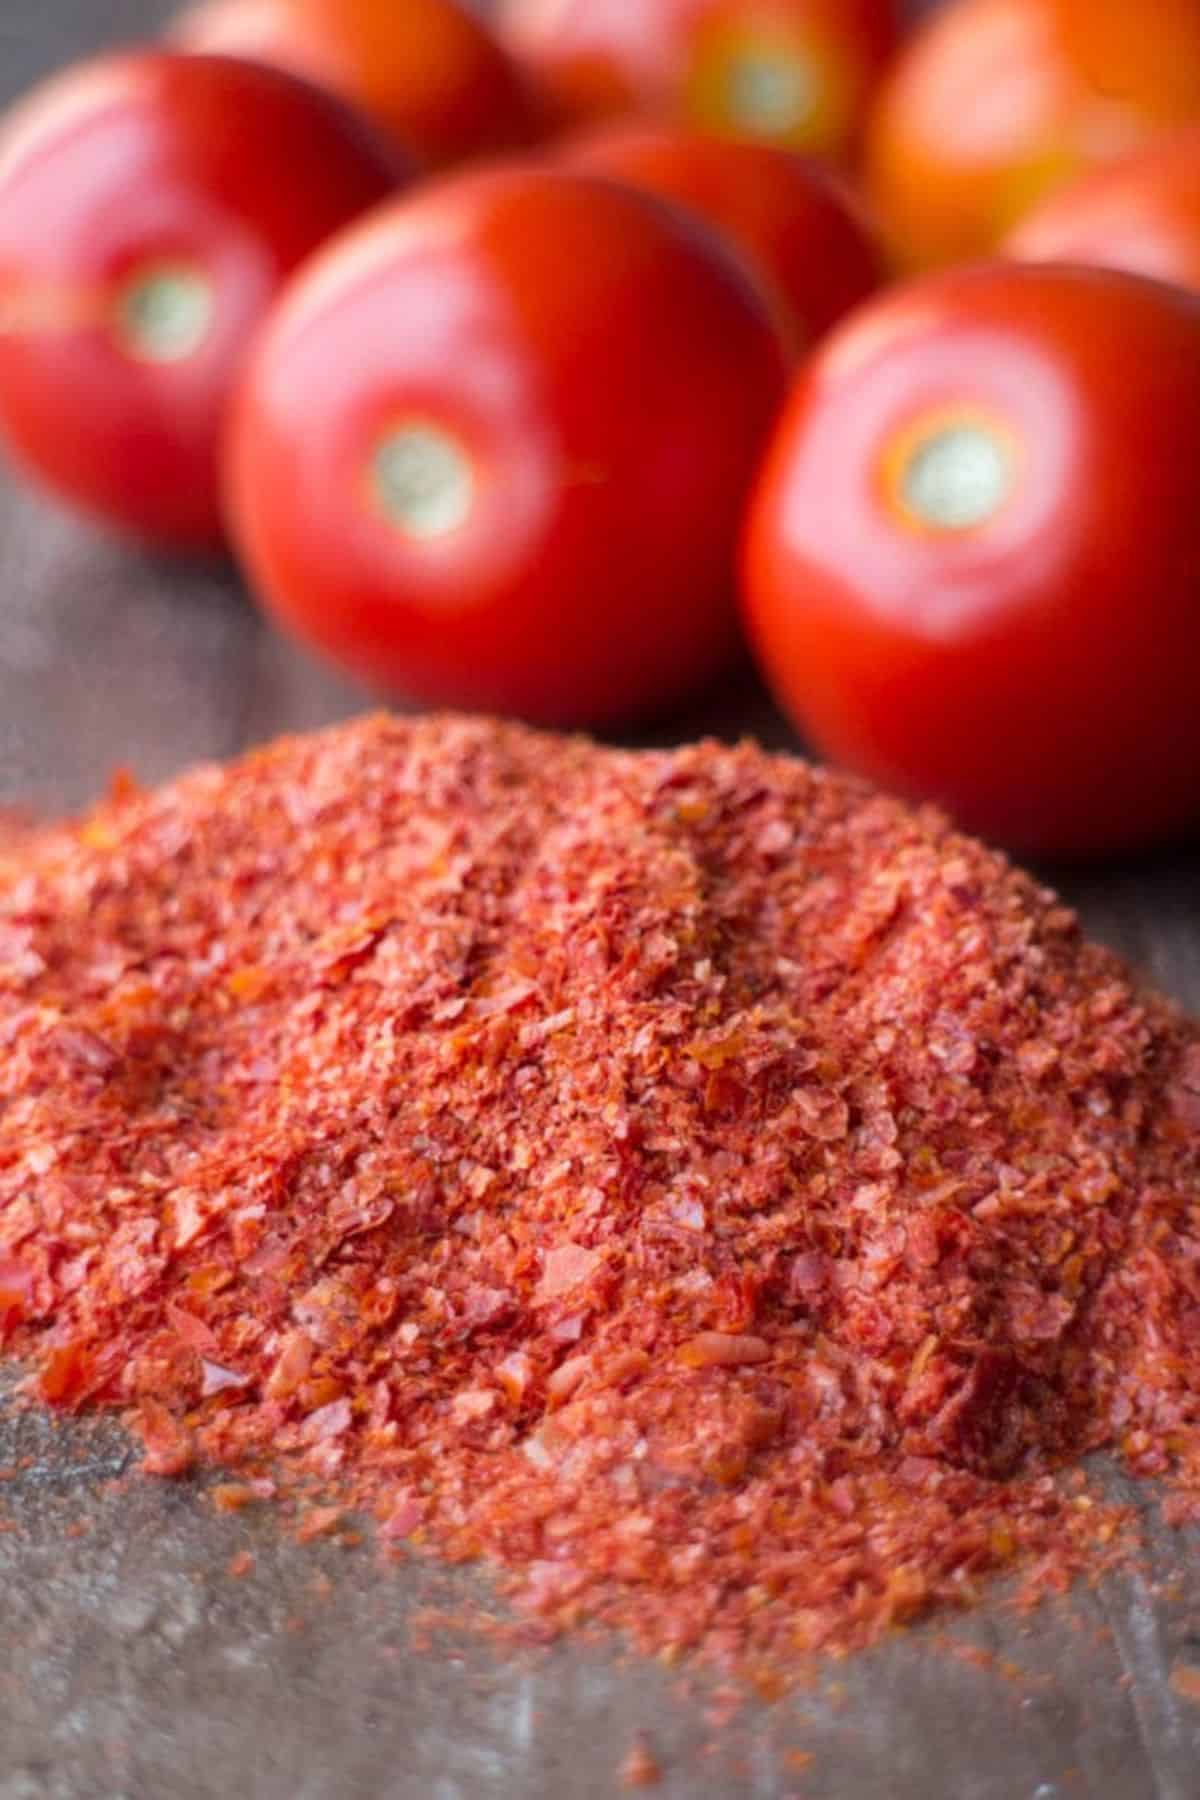 A pile of tomato powder with while tomatoes in the background.